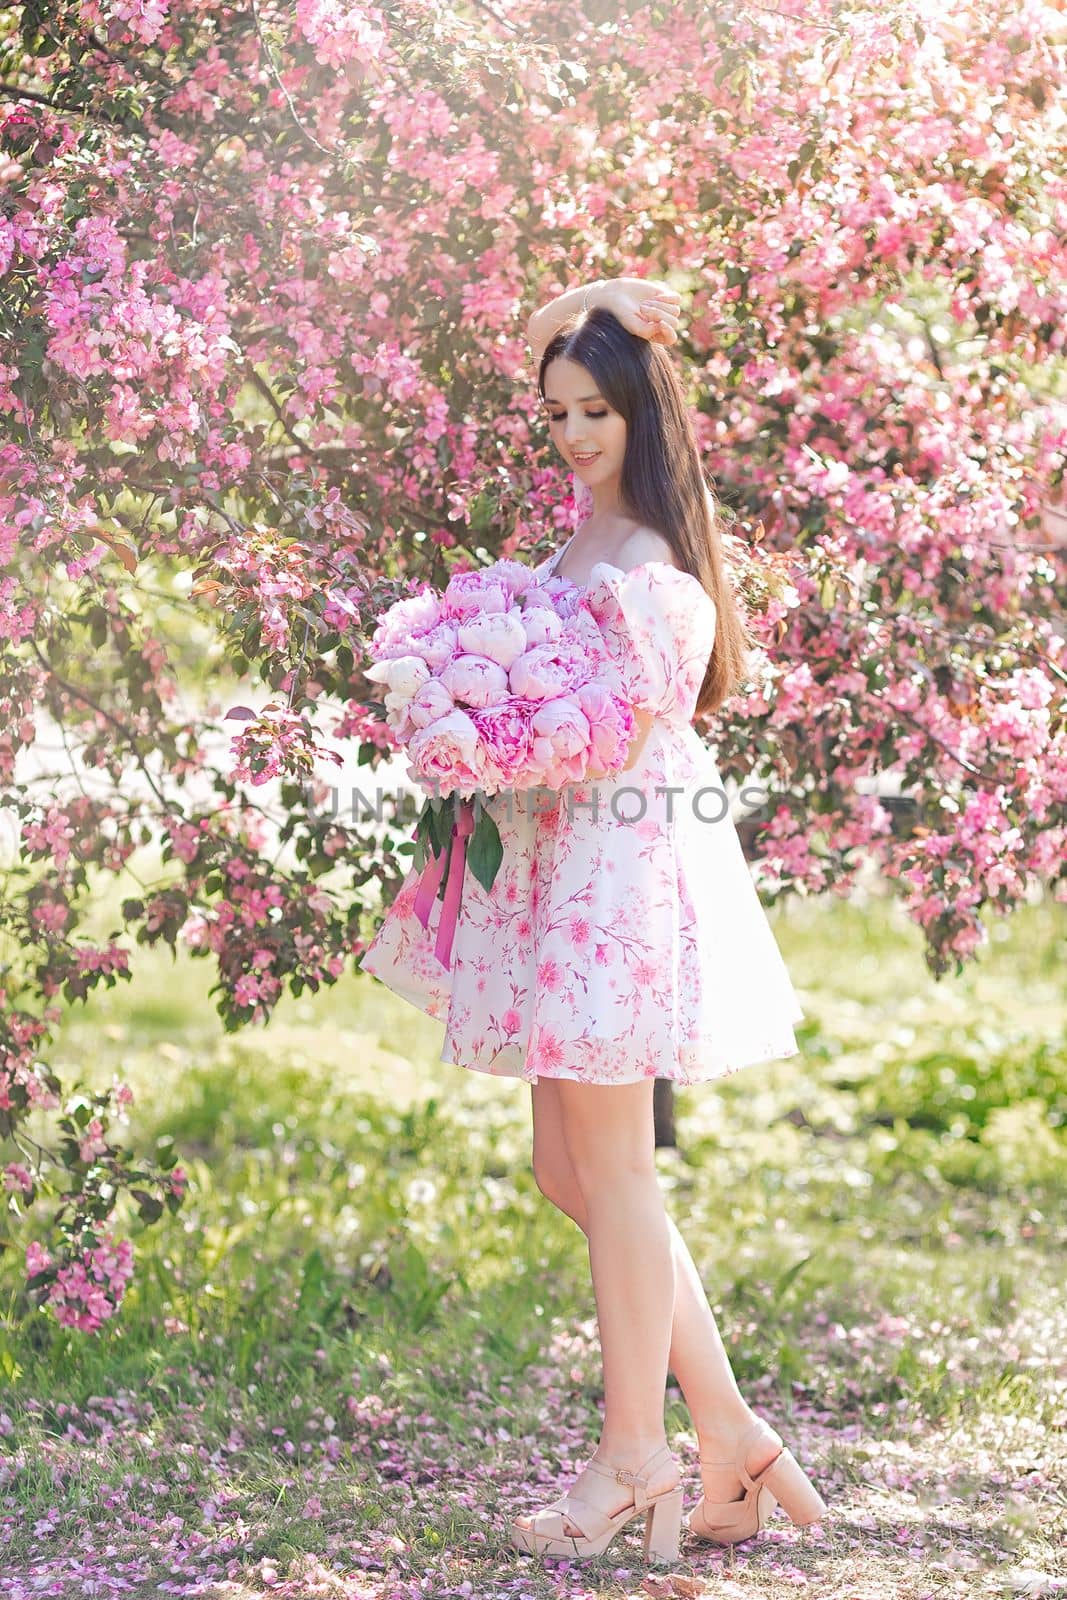 A pretty brunette in a light pink dress, with a large bouquet of pink peonies, stands near pink blooming apple trees, in summer in the garden on a sunny day, a space for copying